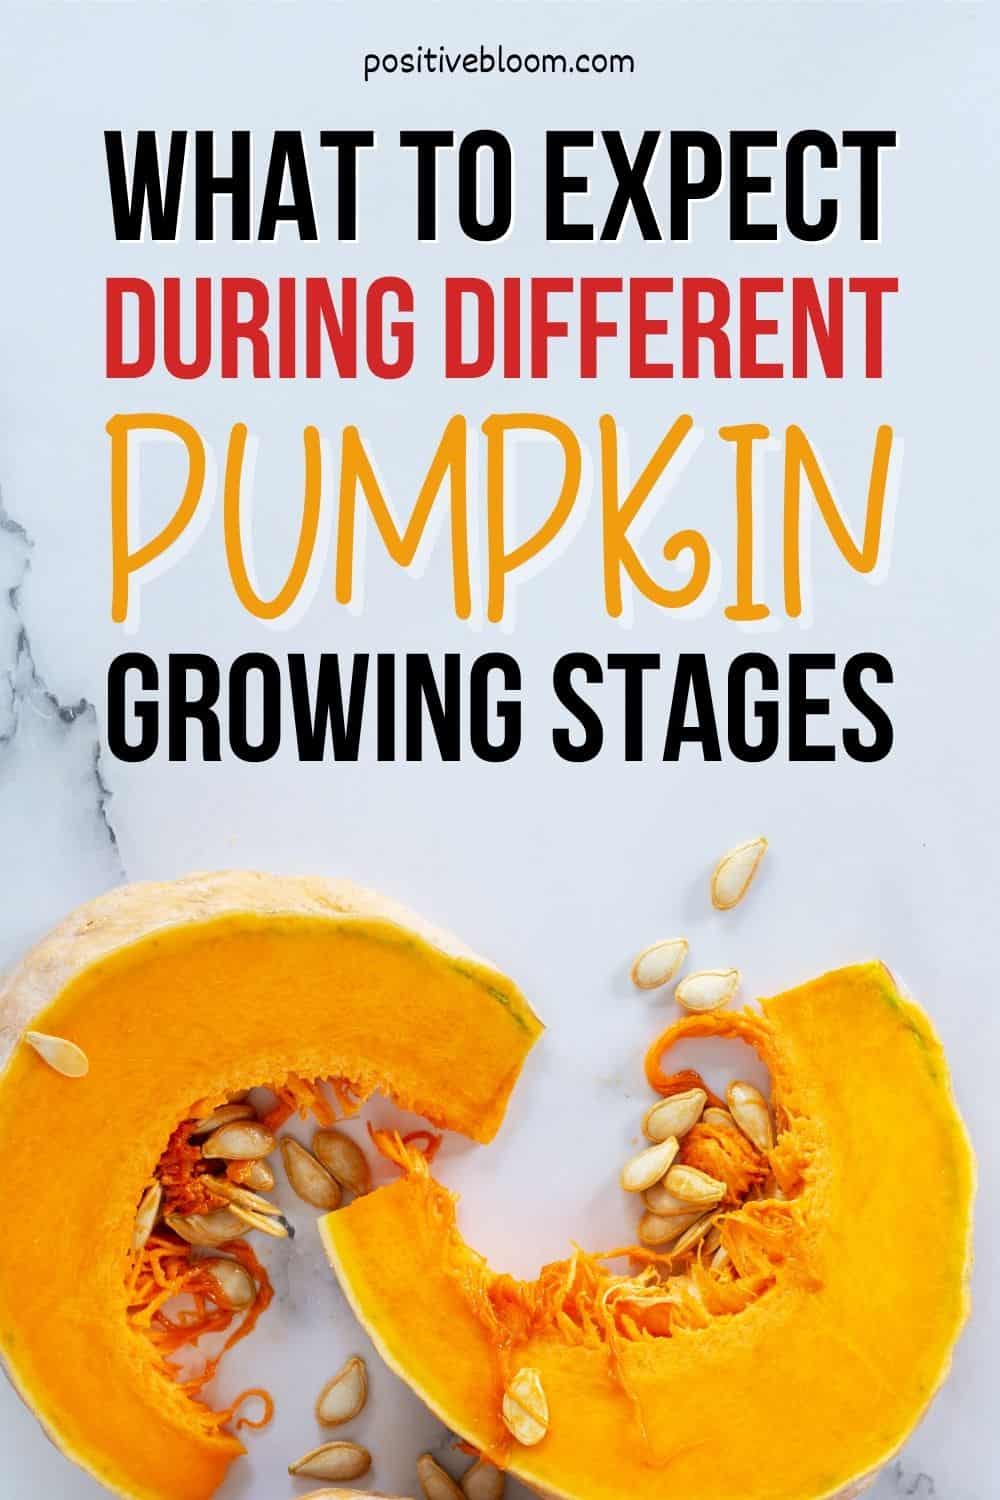 What To Expect During Different Pumpkin Growing Stages Pinterest